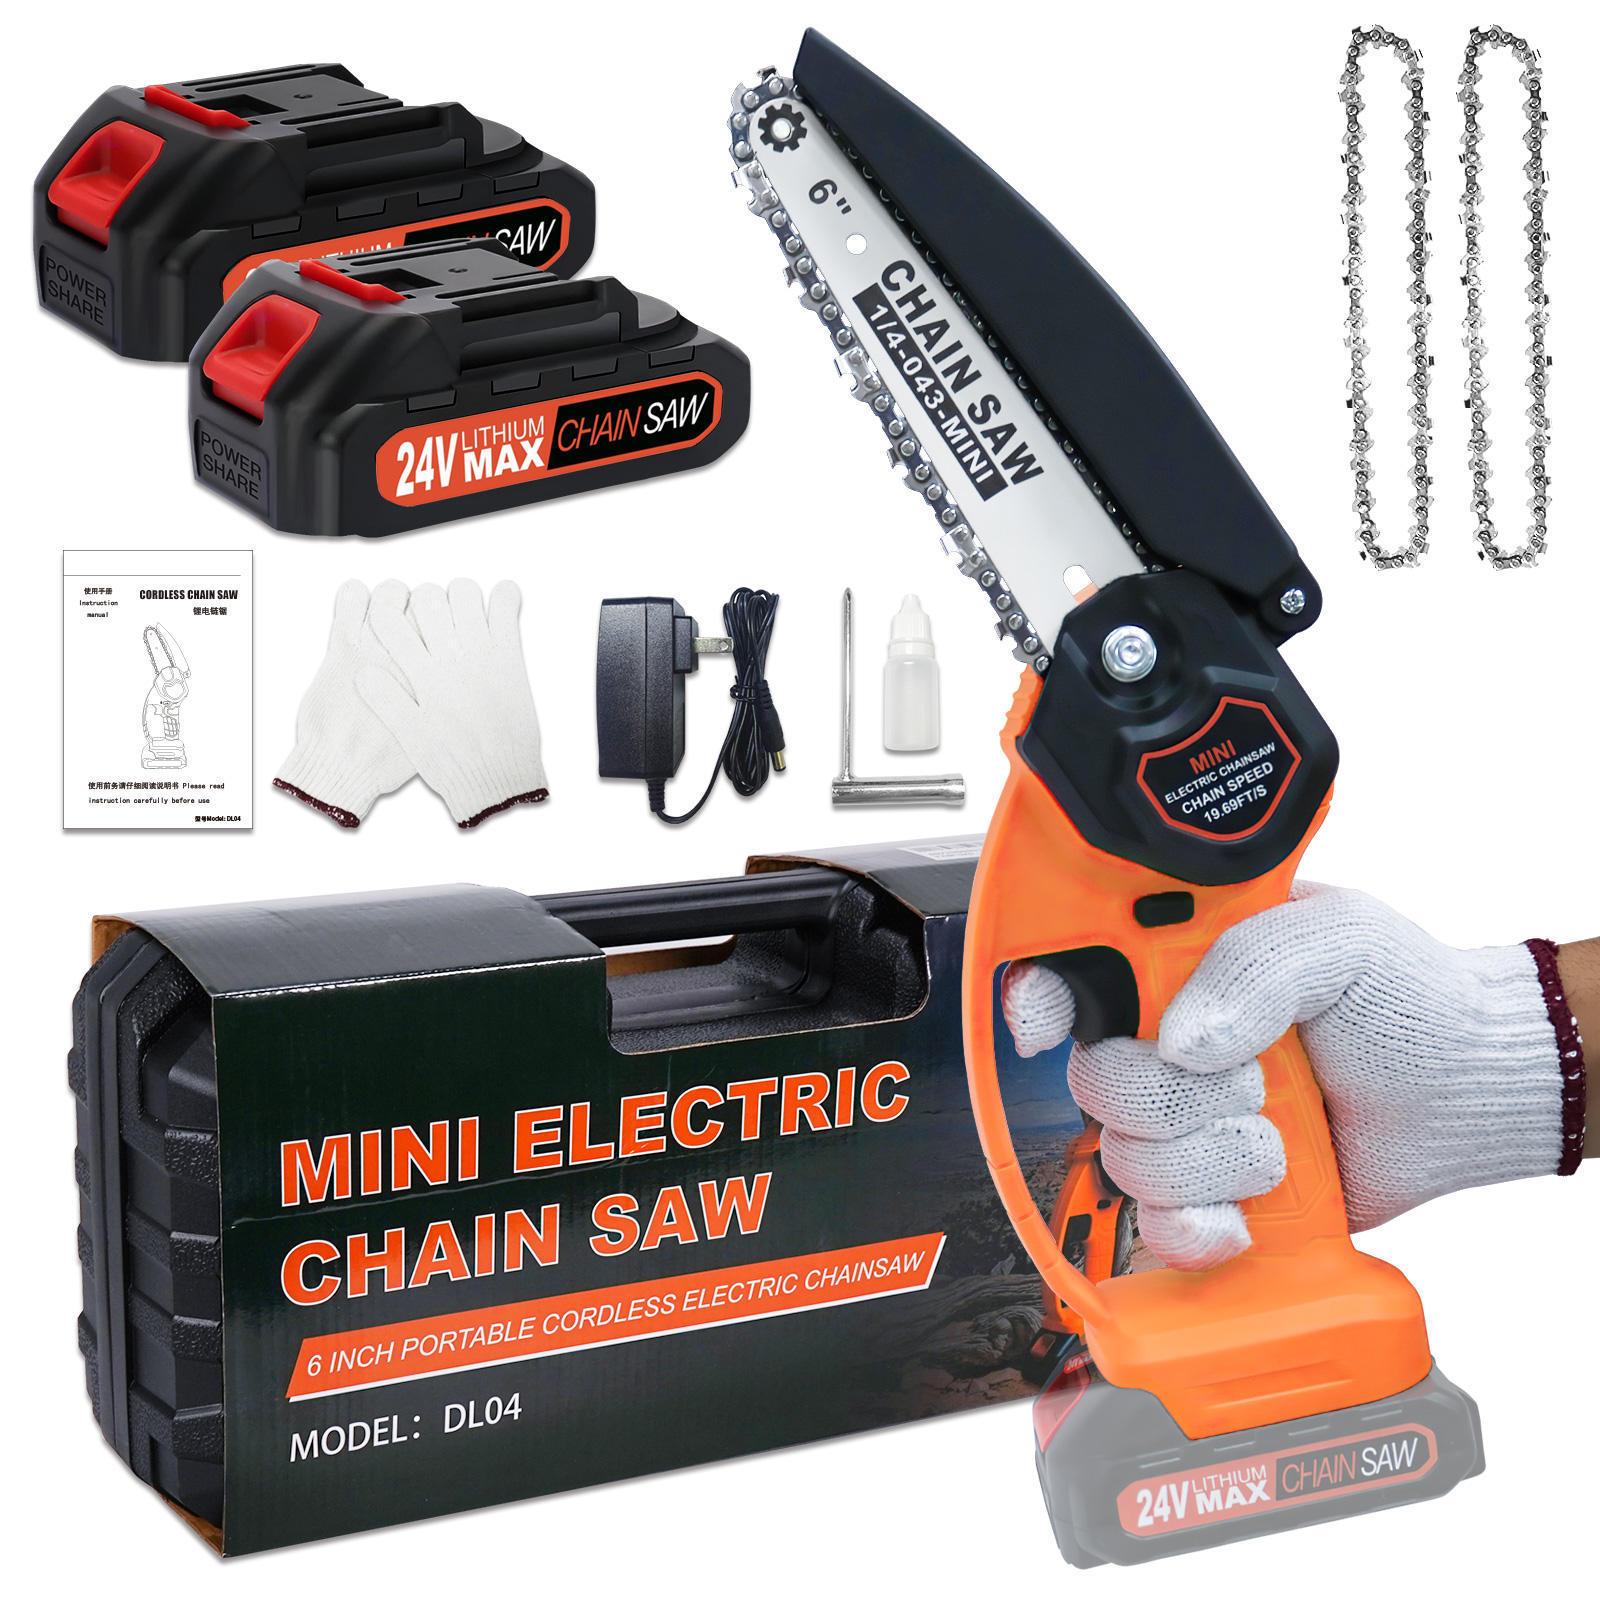 NEXPOW 6" Mini Chainsaw 24V Battery Powered Chainsaw ,with Safety Lock,with 2 Batteries 2 Chains, 6-inch Cordless Handheld Chain Saw Wood Cutter,Orange - image 1 of 8